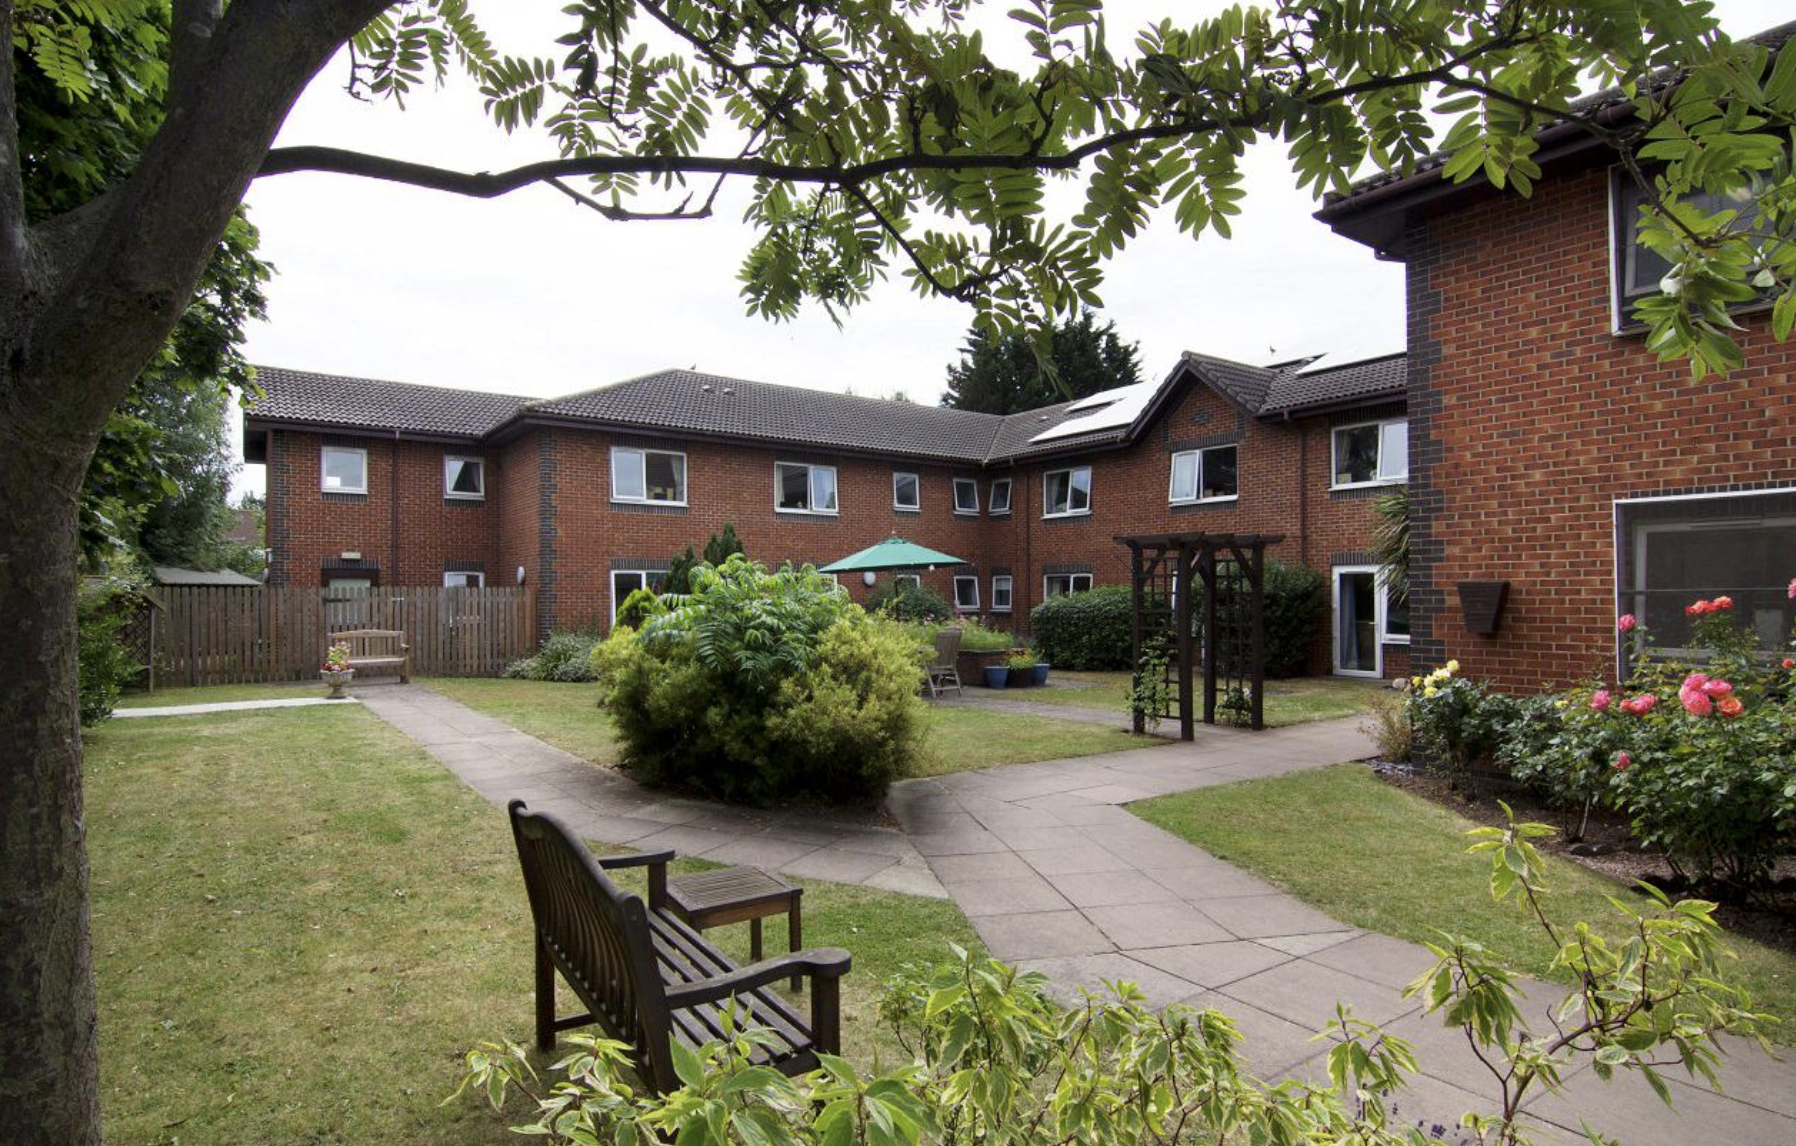 Exterior of Abbotsleigh Mews care home in Sidcup, Greater London